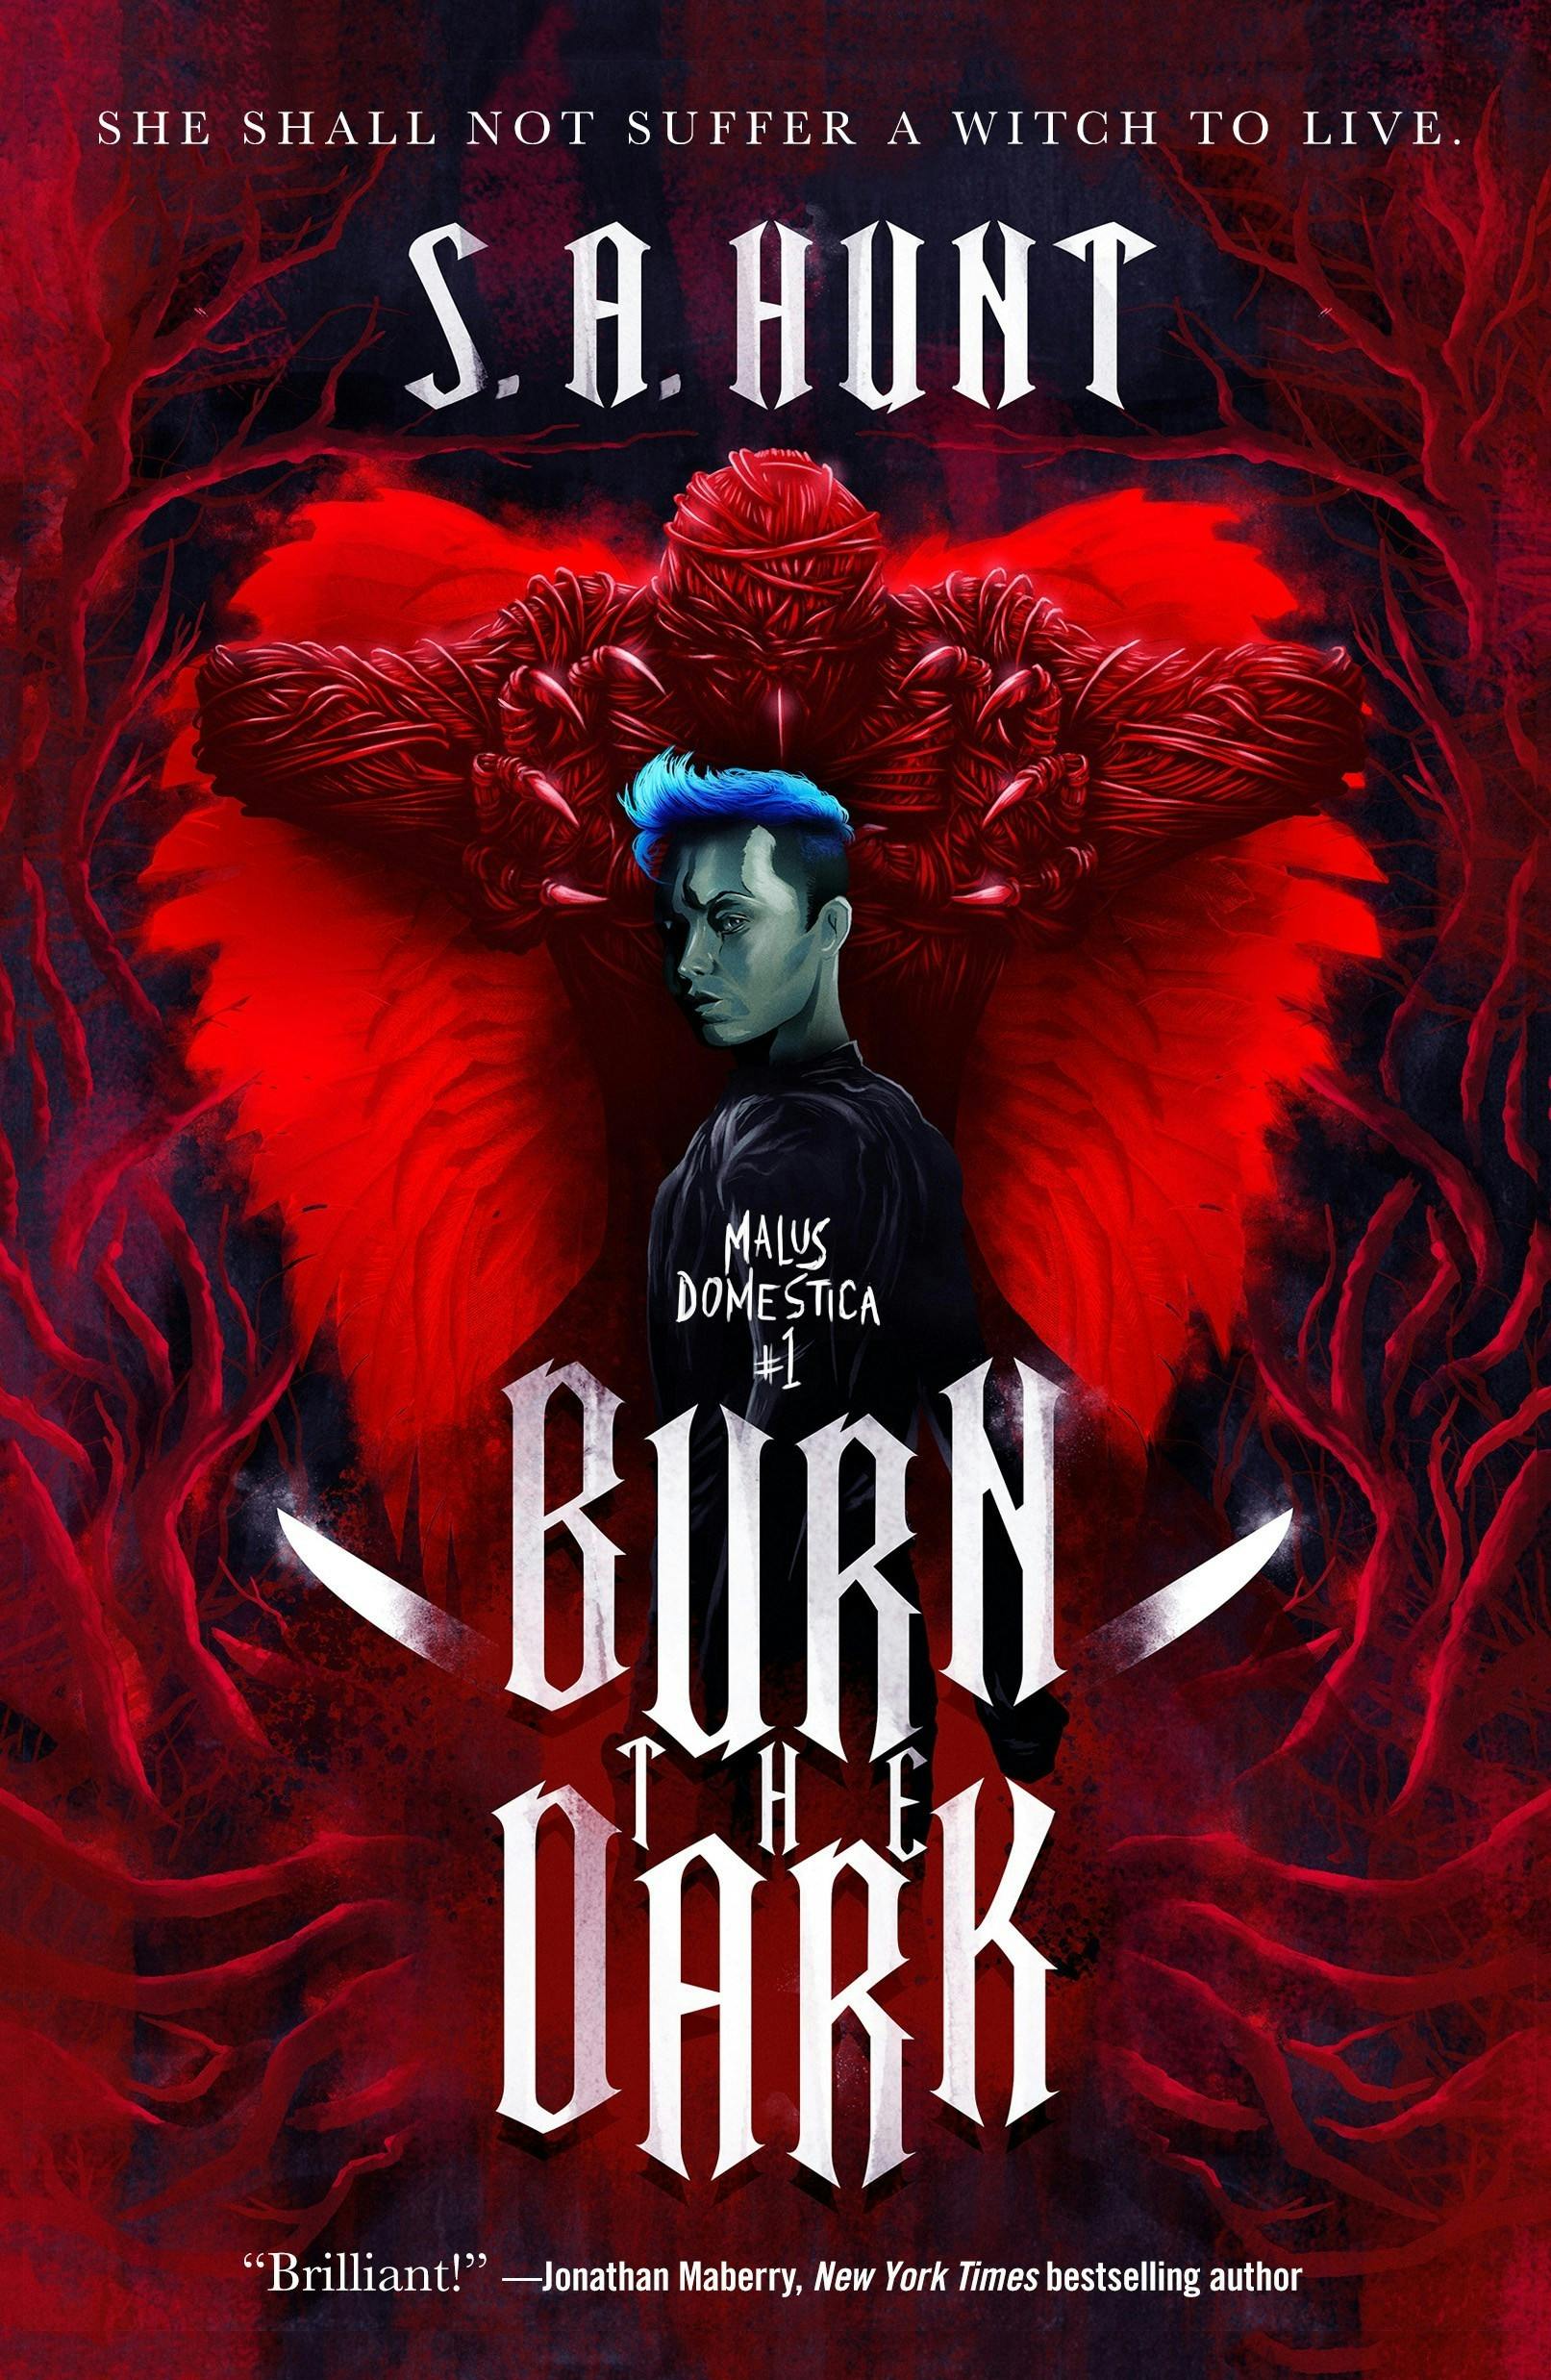 Cover for the book titled as: Burn the Dark